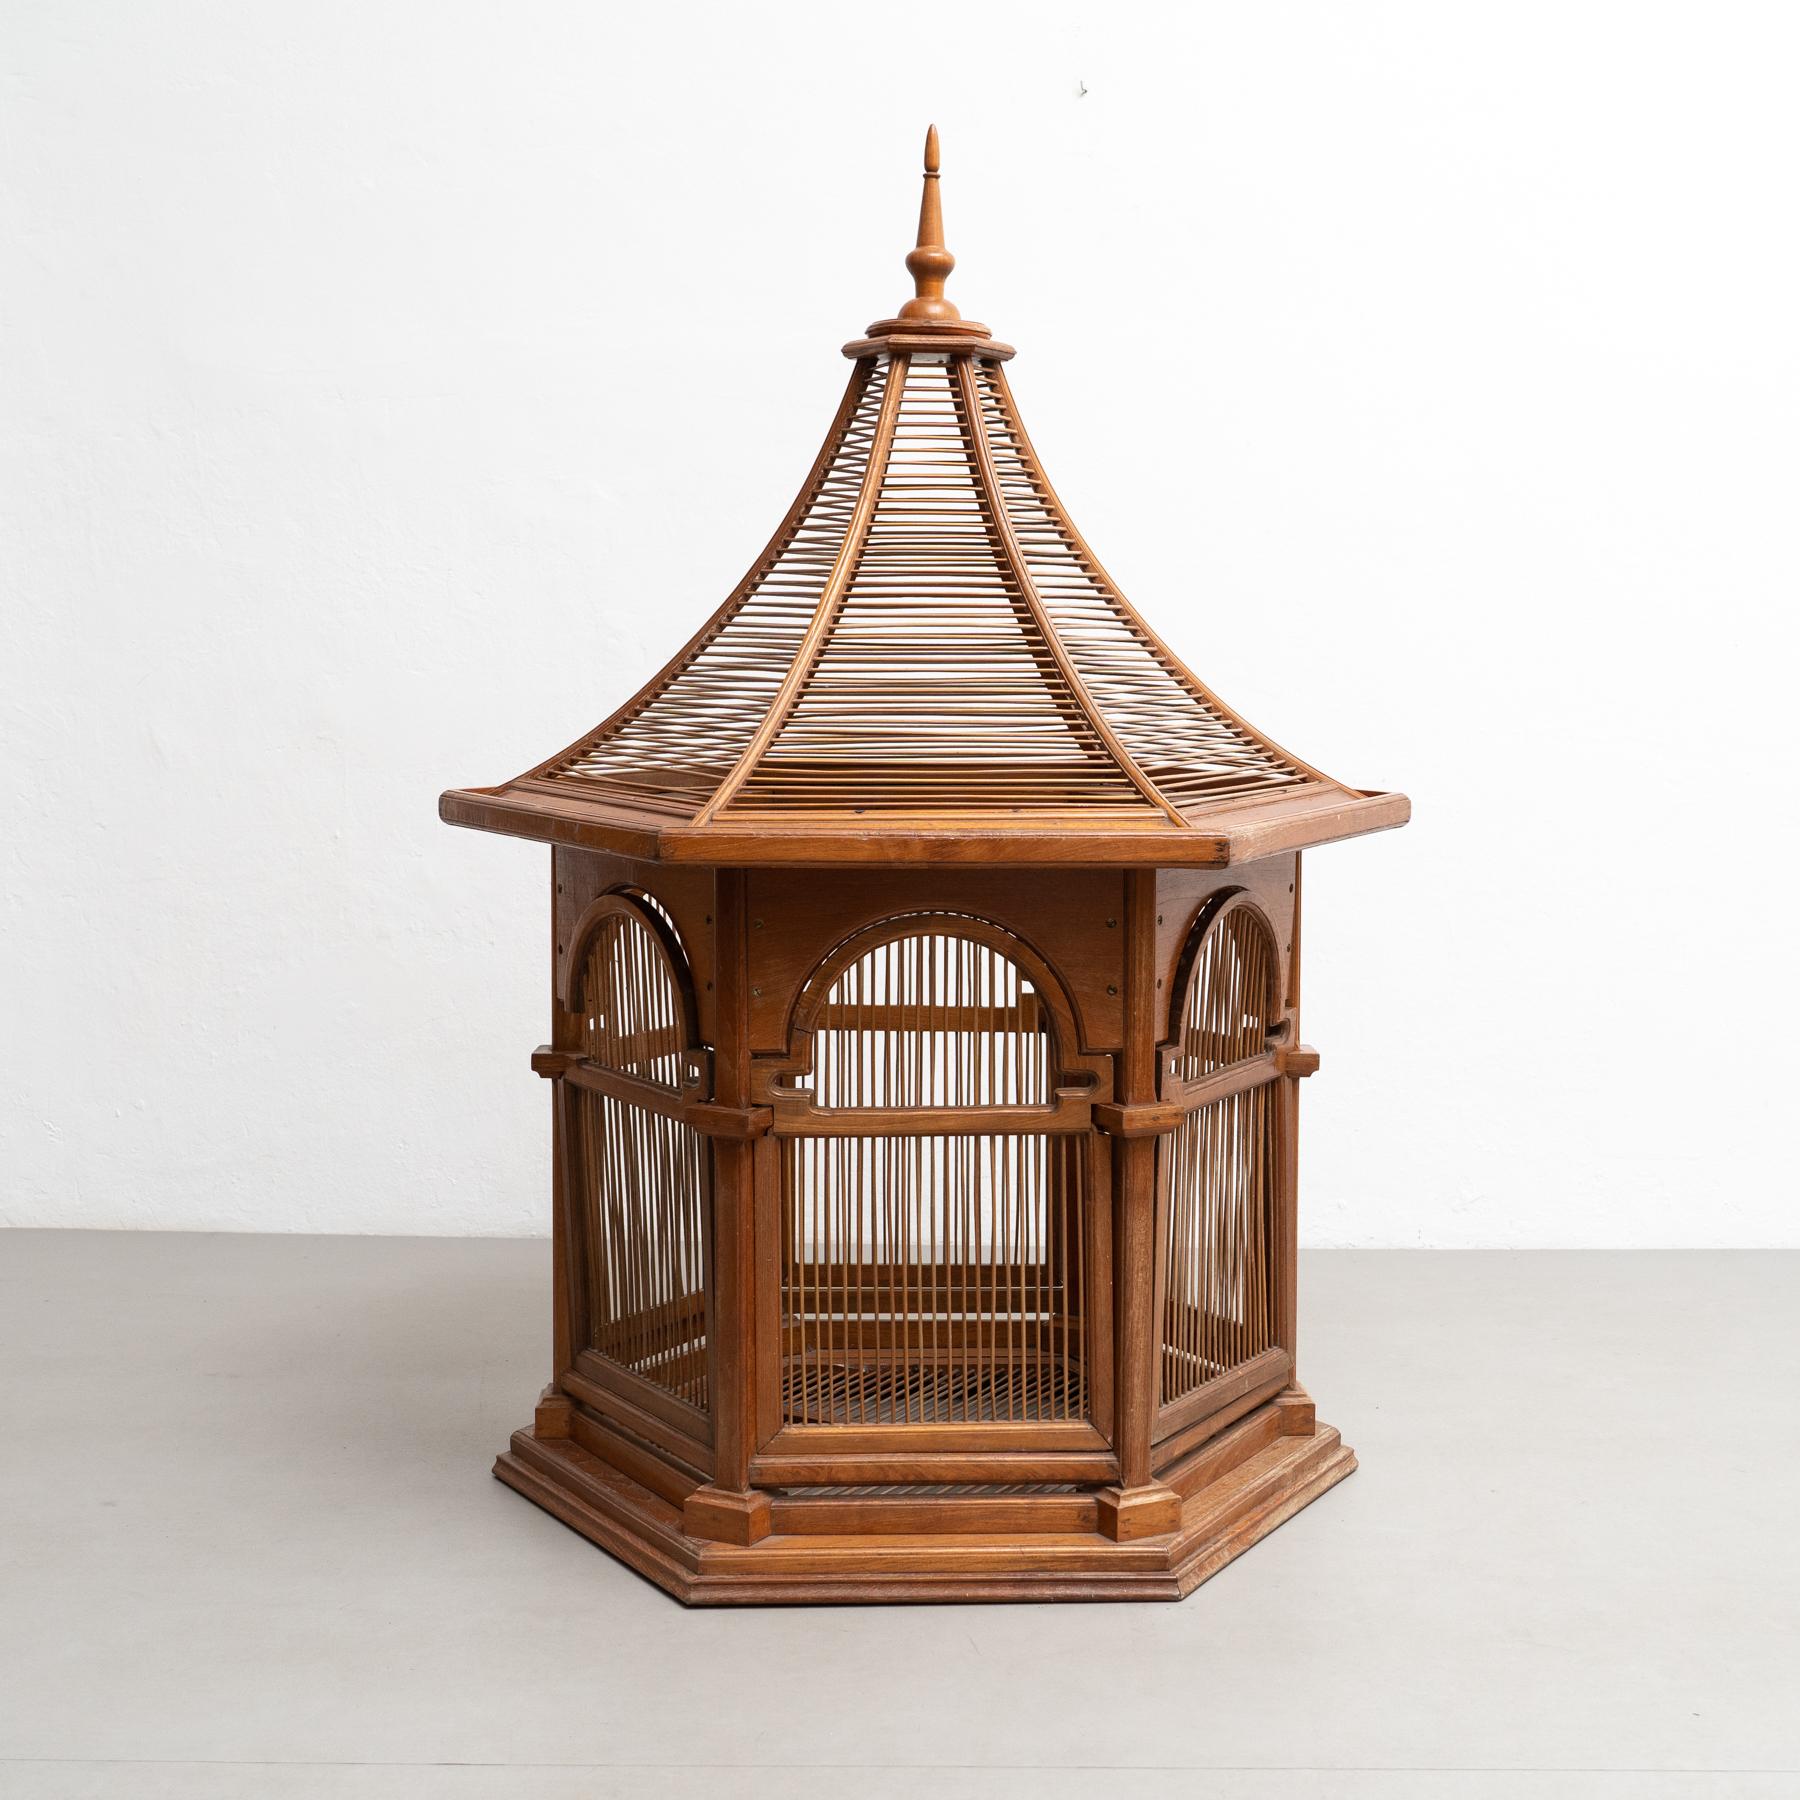 Elevate your decor with the grandeur of this large vintage-style wooden cage, a meticulous replica inspired by Gaudí's iconic 